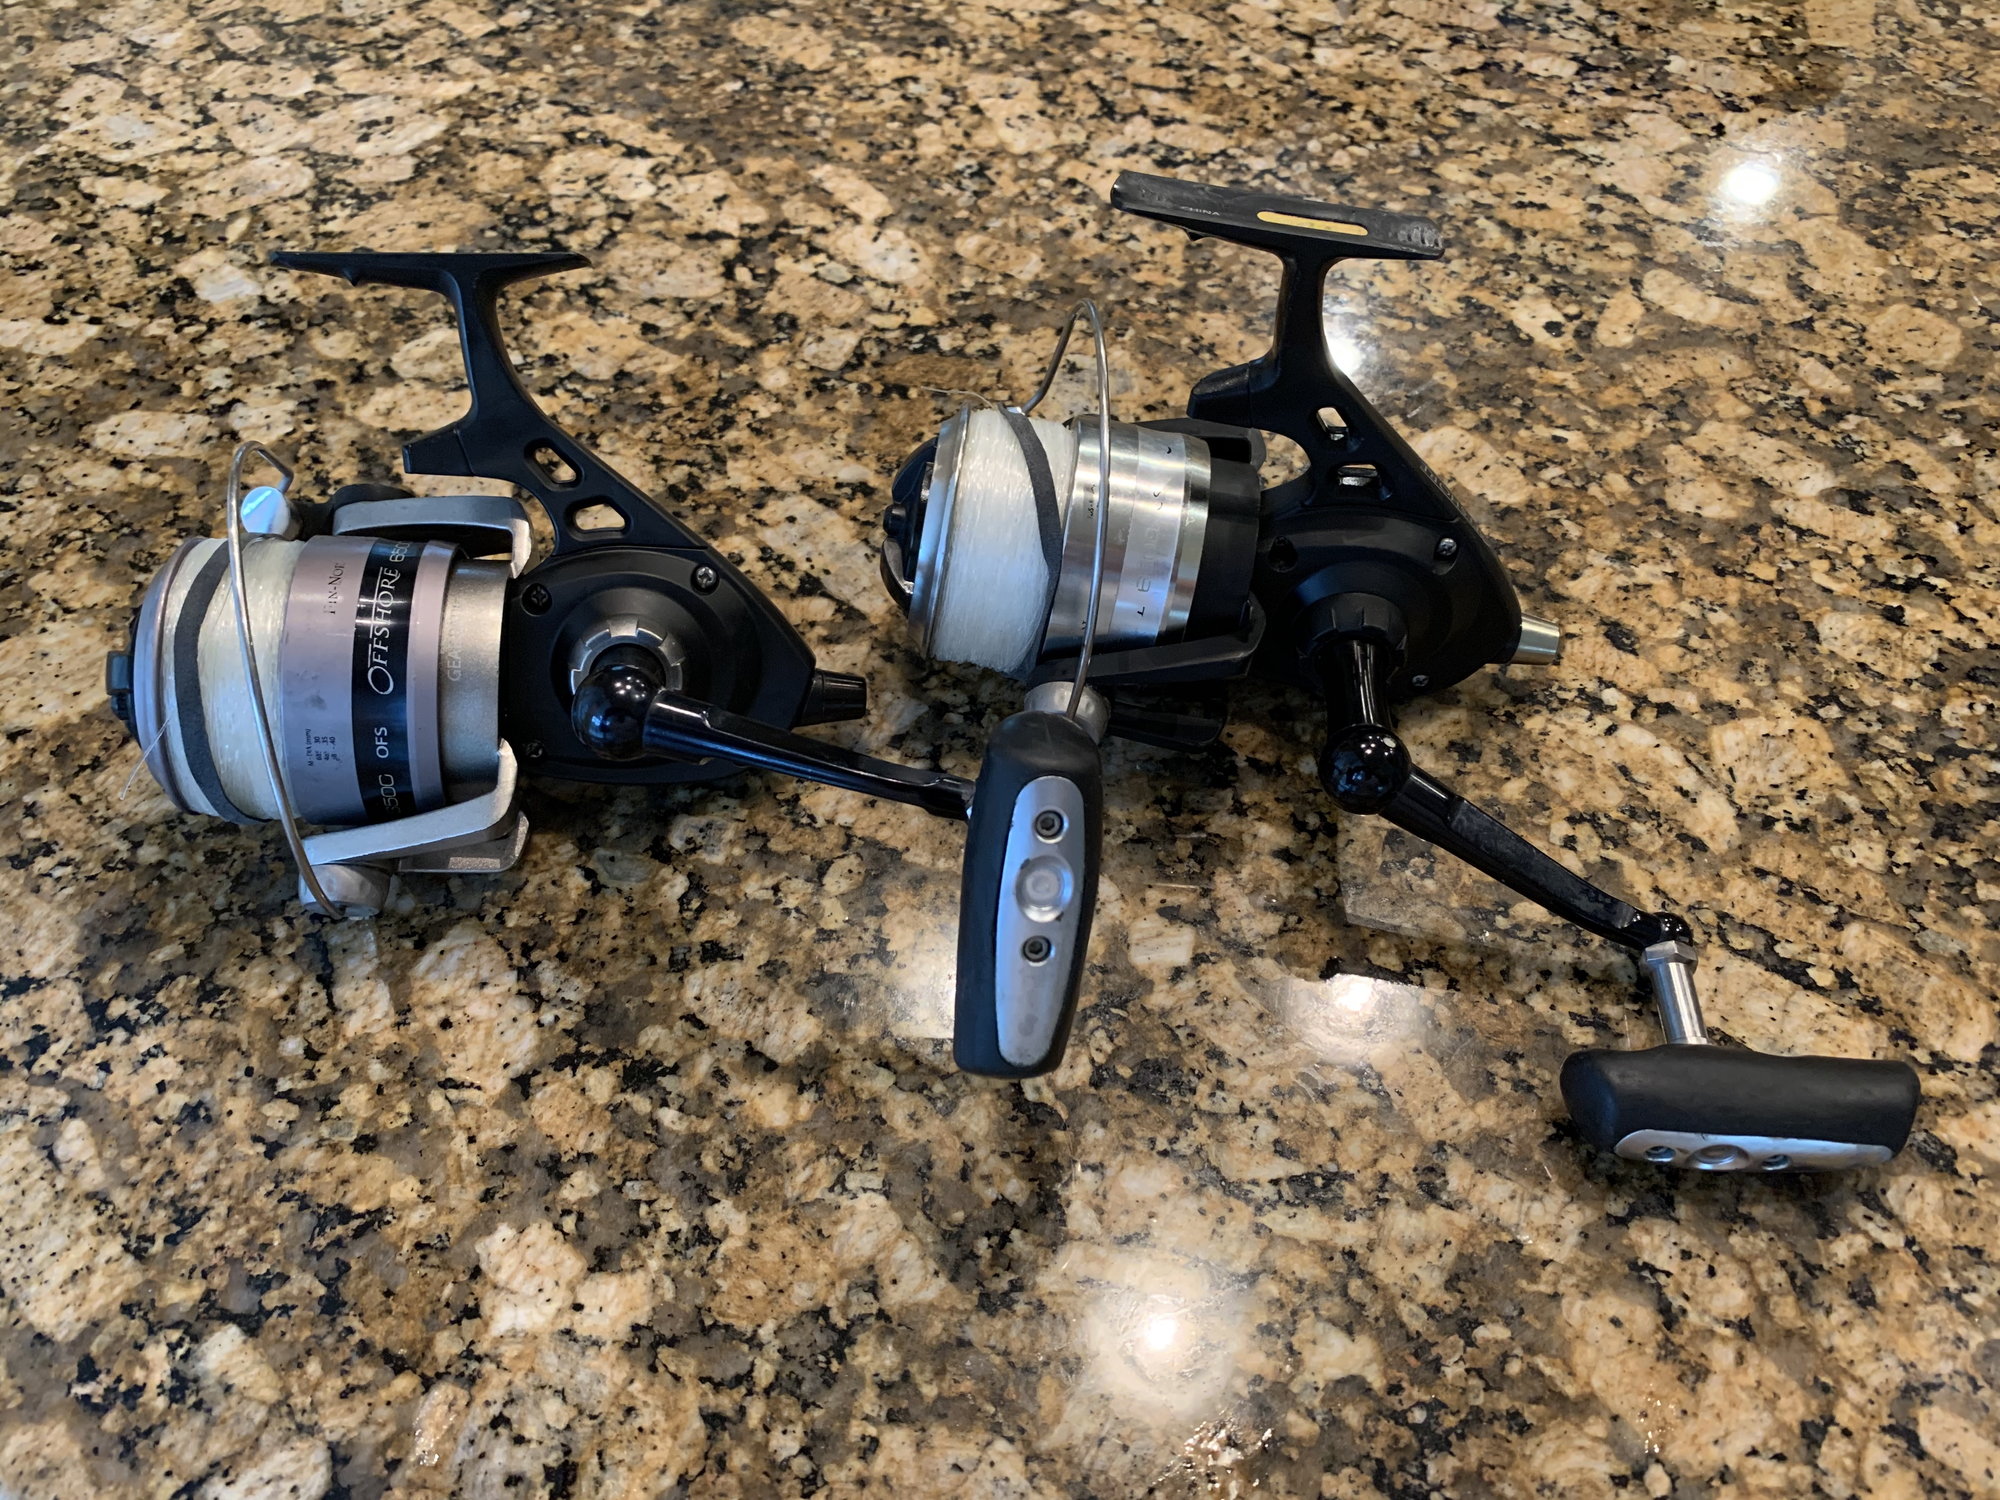 Fin Nor Offshore 6500 Reels For Sale - The Hull Truth - Boating